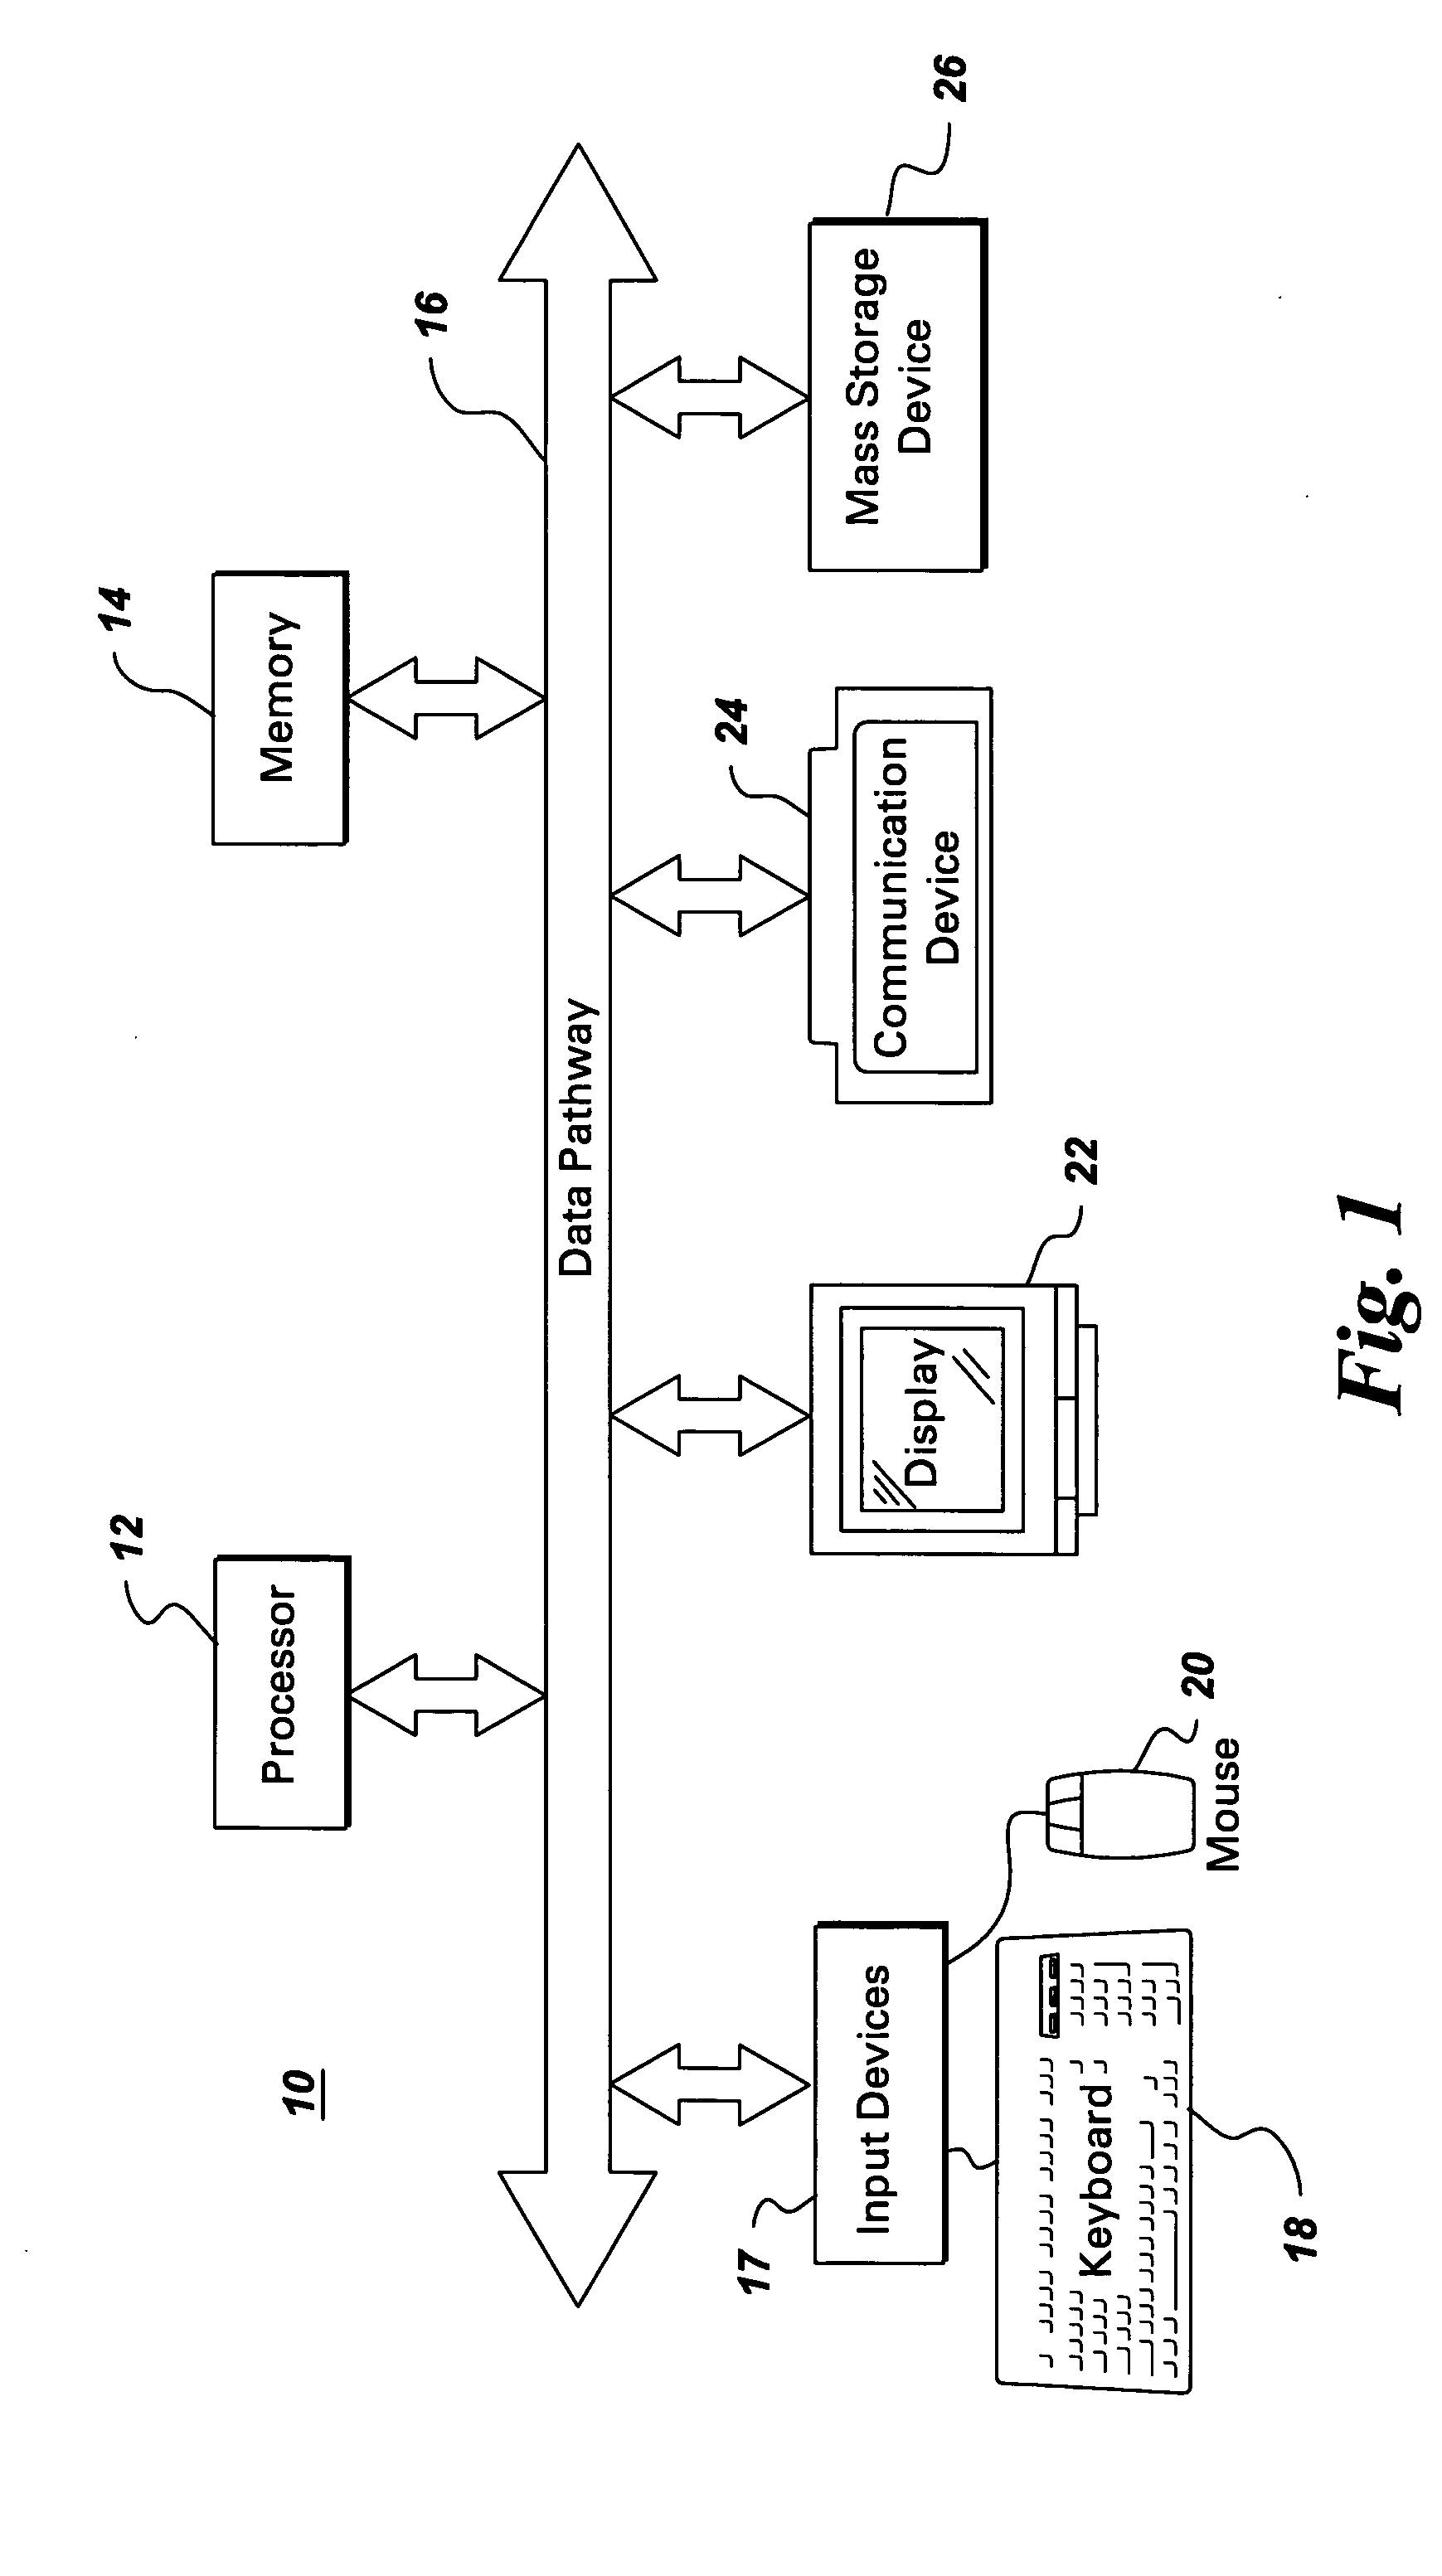 System, method and computer product to detect behavioral patterns related to the financial health of a business entity